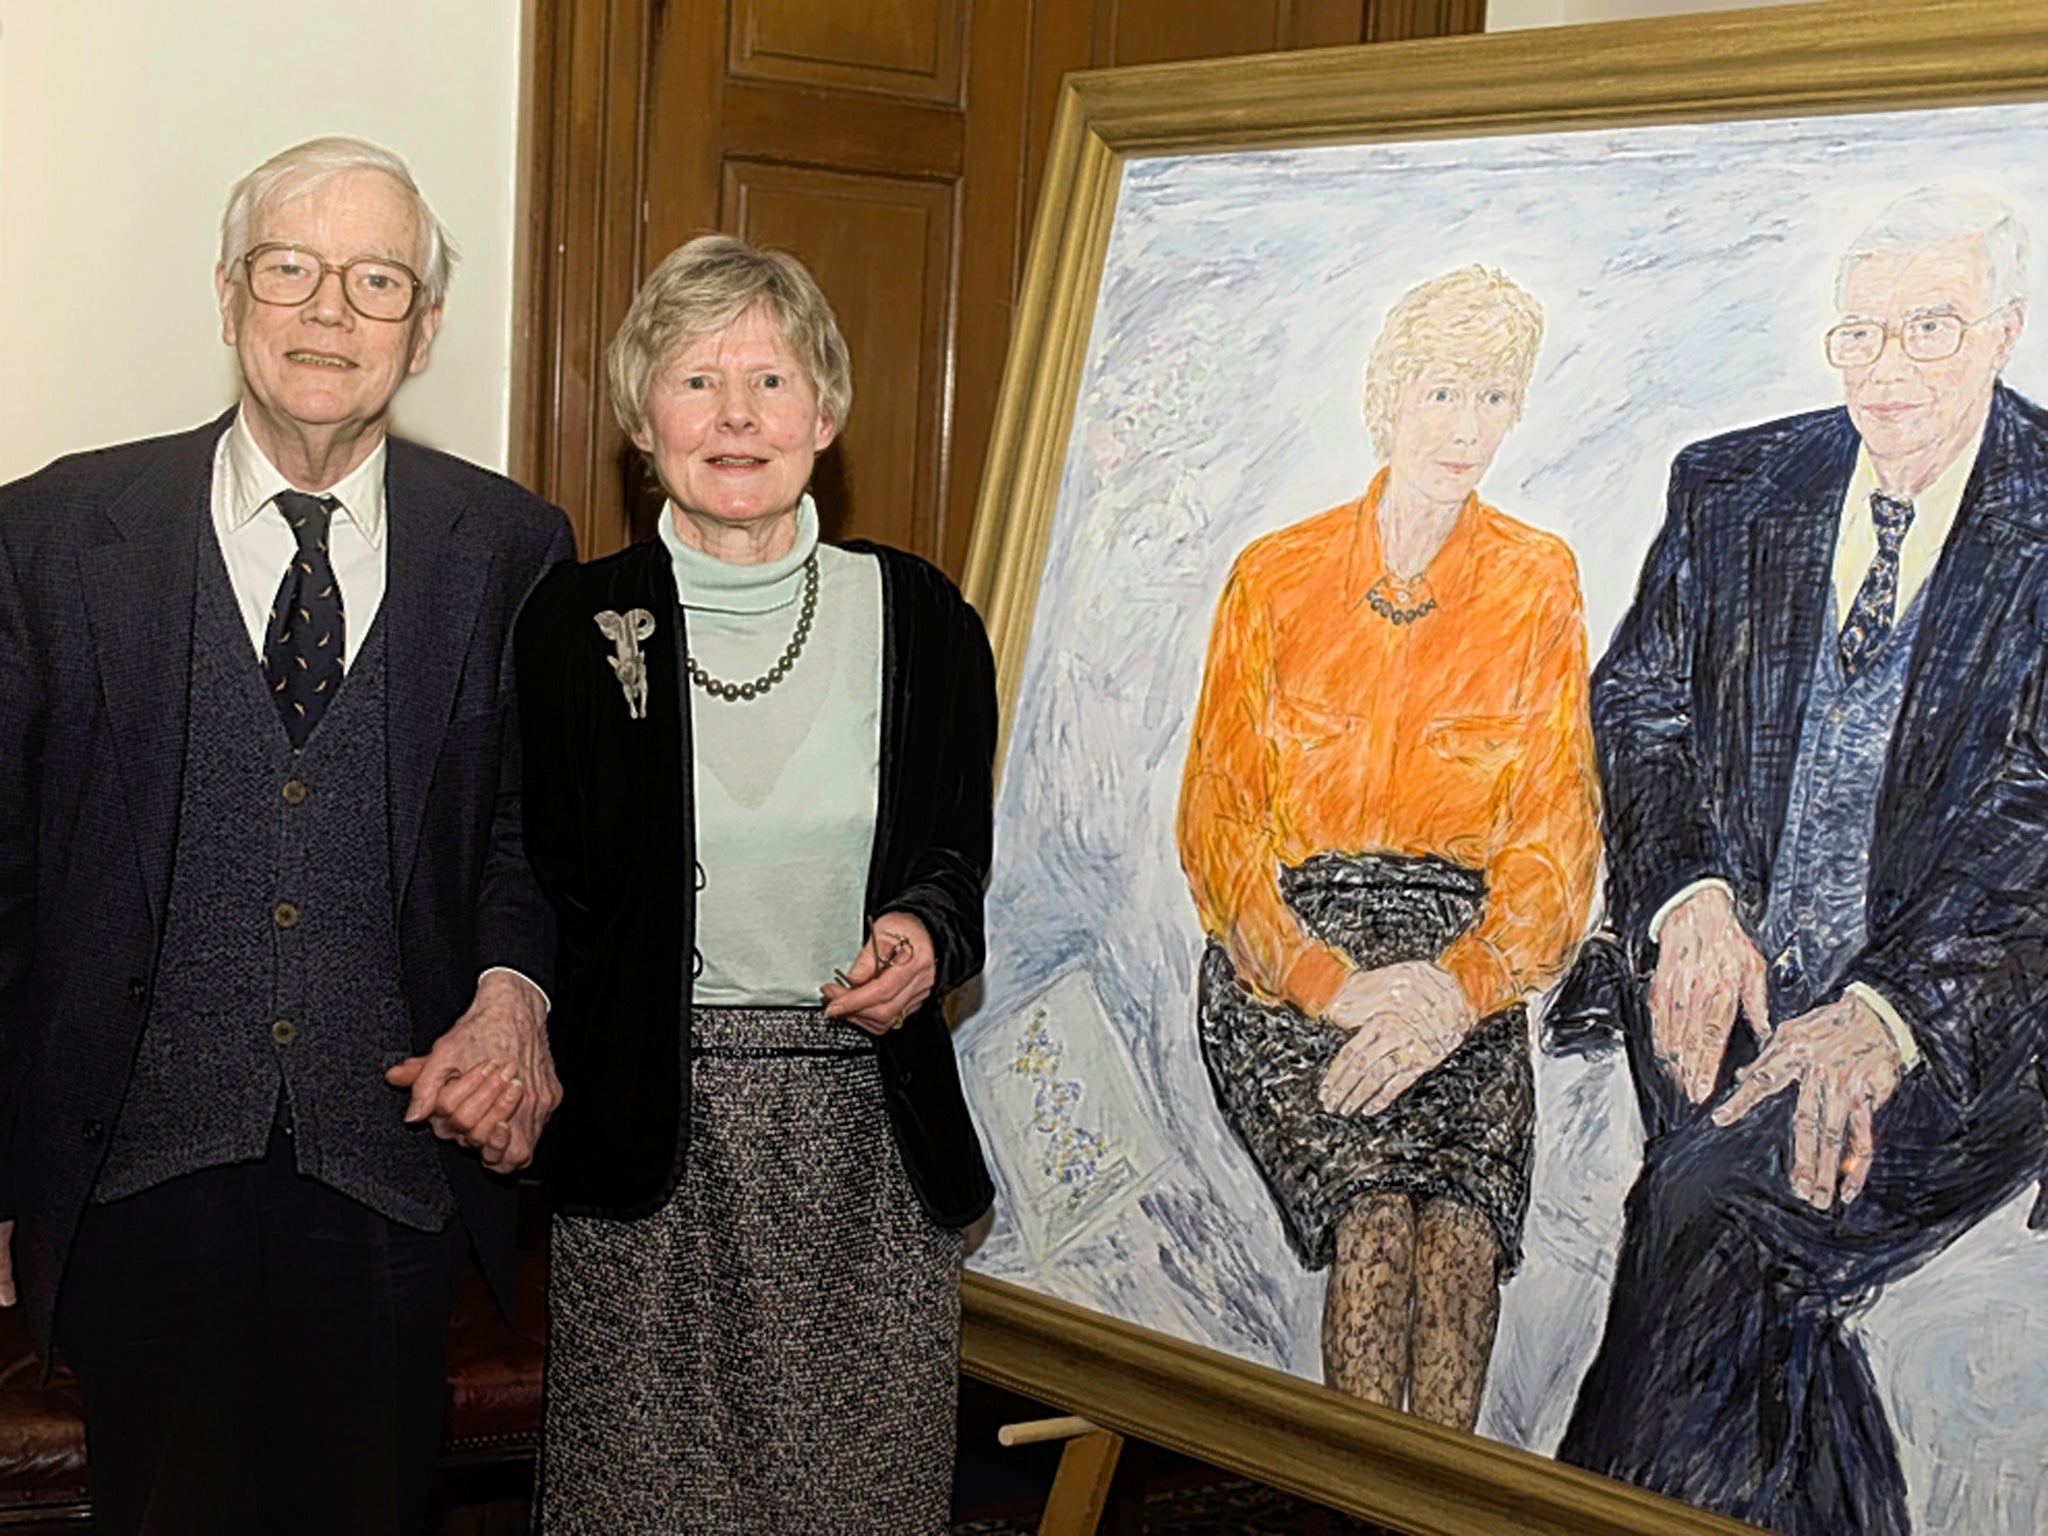 Murray and his wife Noreen, with their double portrait; they made a formidable team